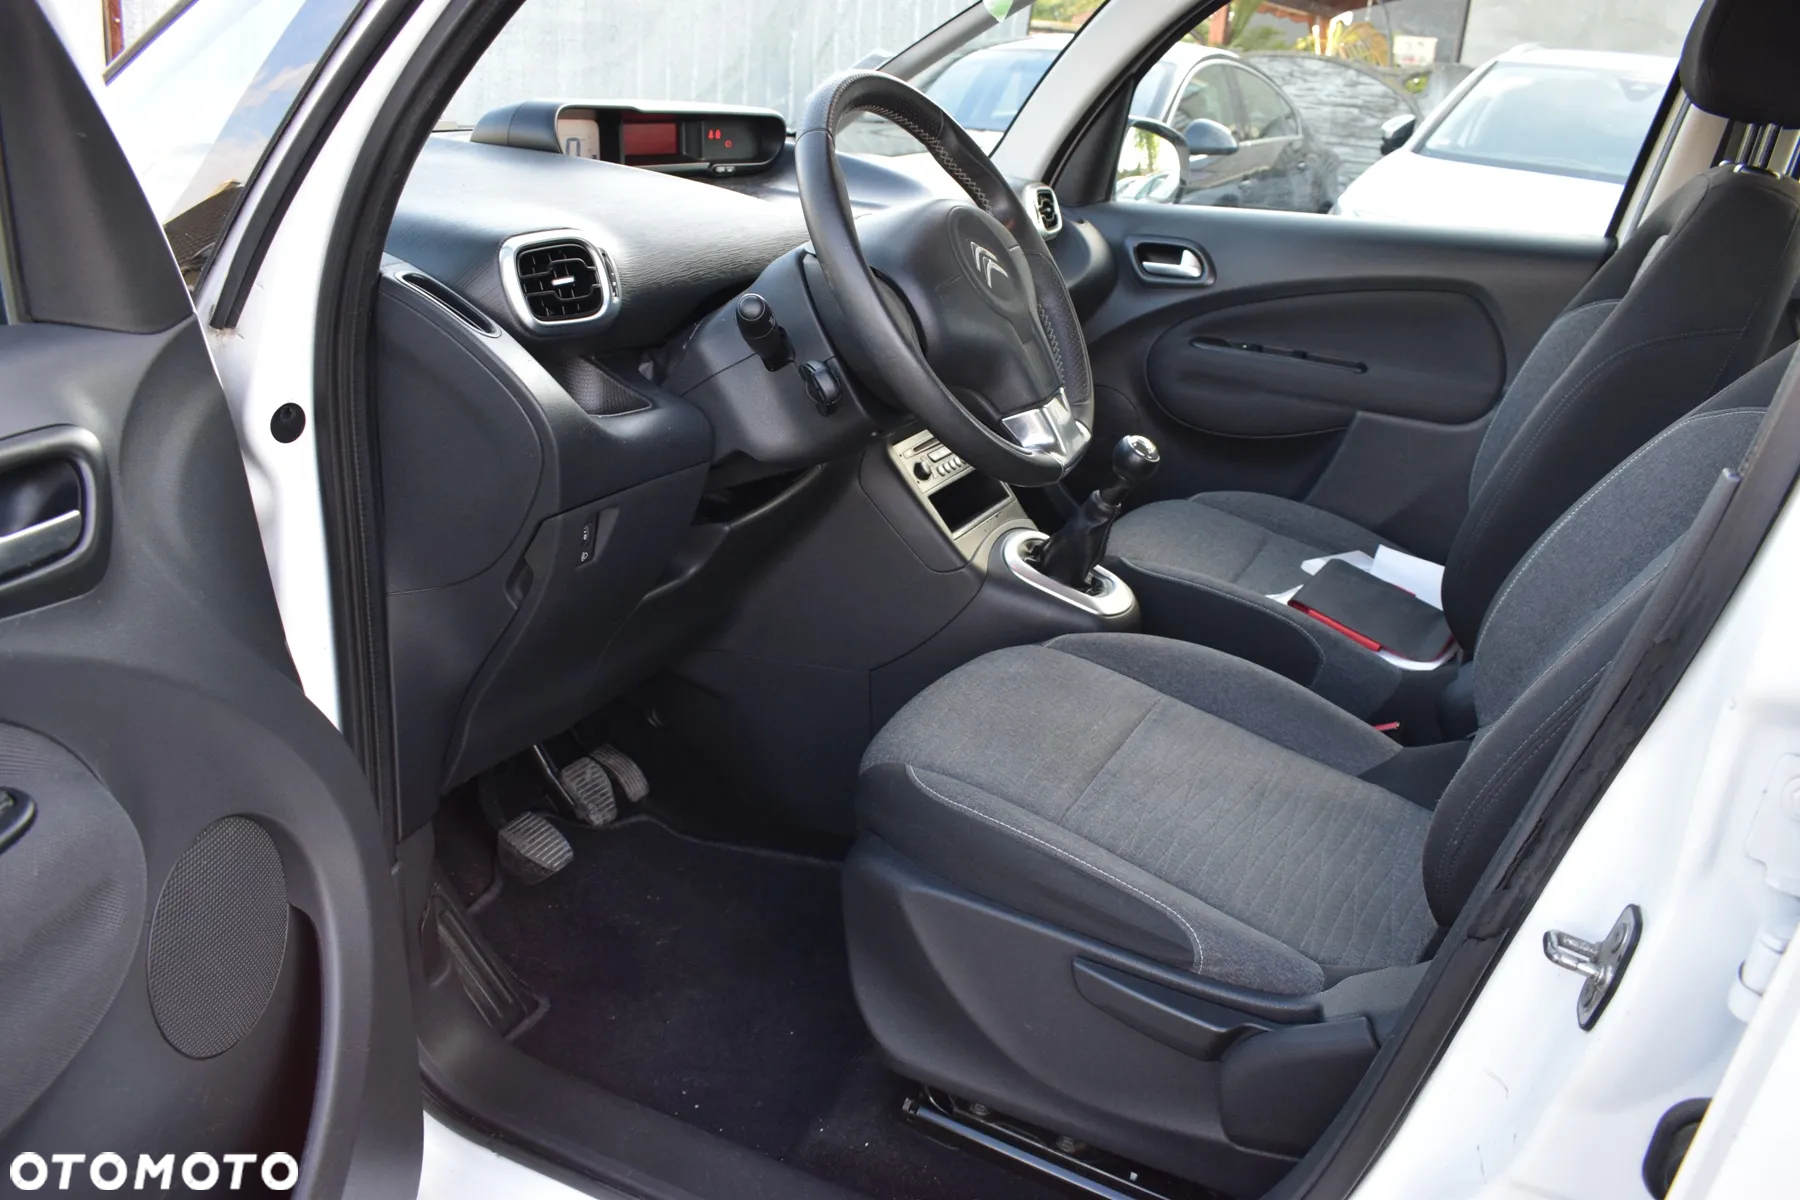 Citroën C3 Picasso 1.6 HDi Selection - 5